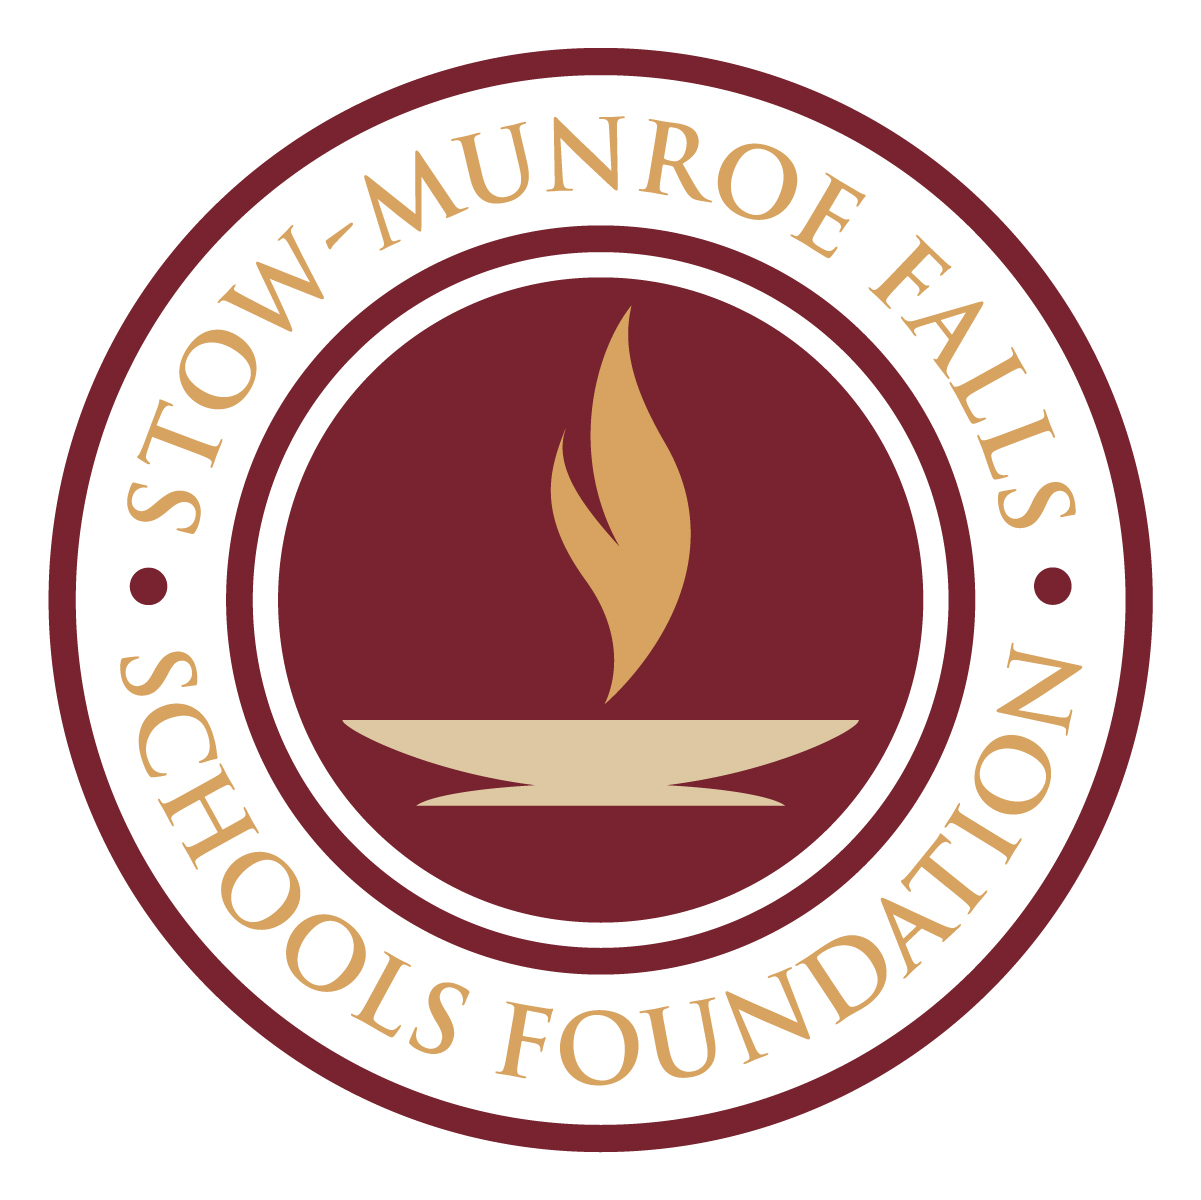 StowMunroe Falls Schools Foundation Attracts New Leadership and Large